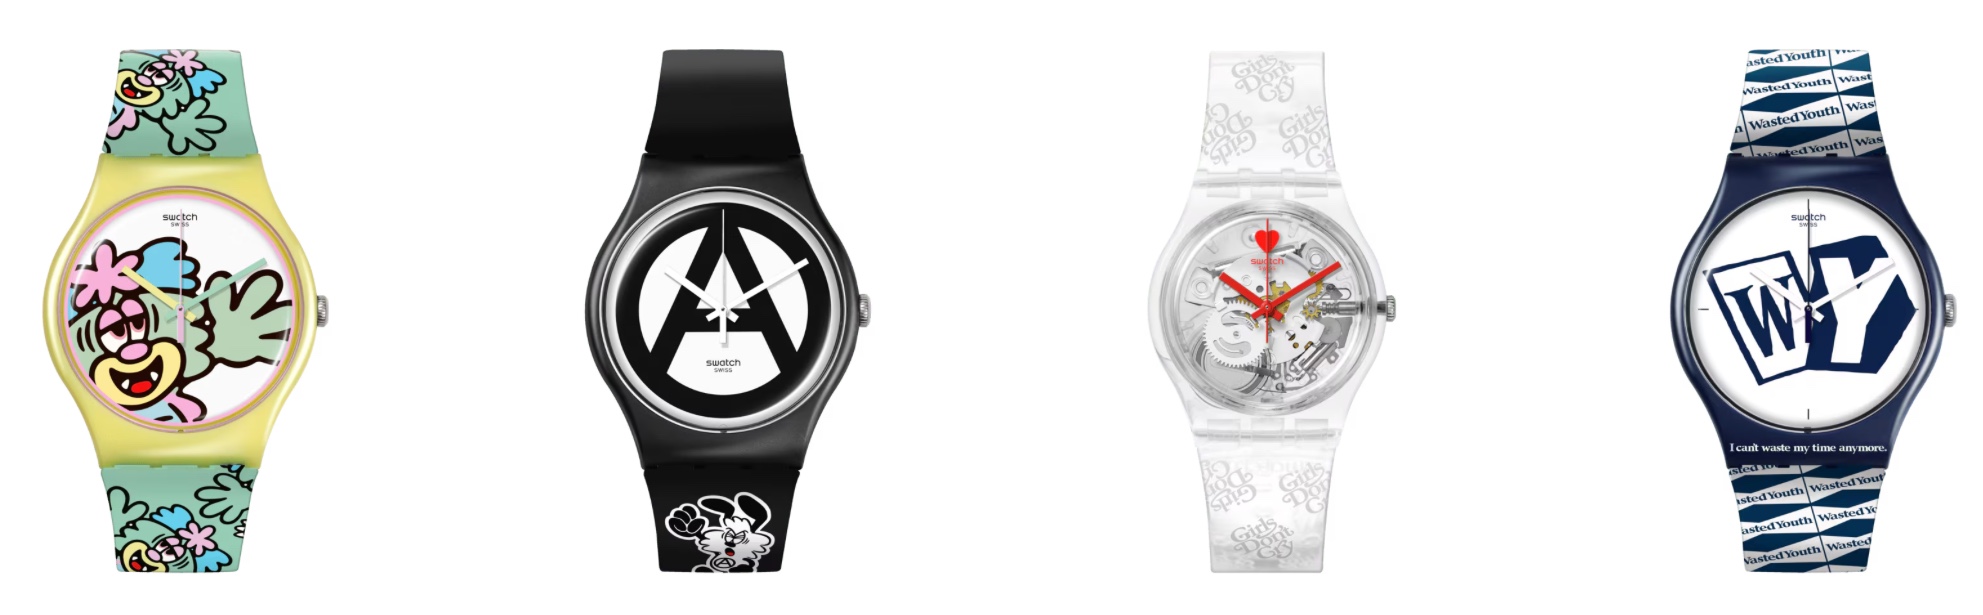 , Swatch and Japanese graphic artist Verdy join forces for art installation and limited-edition watch at Biennale Arte 2024